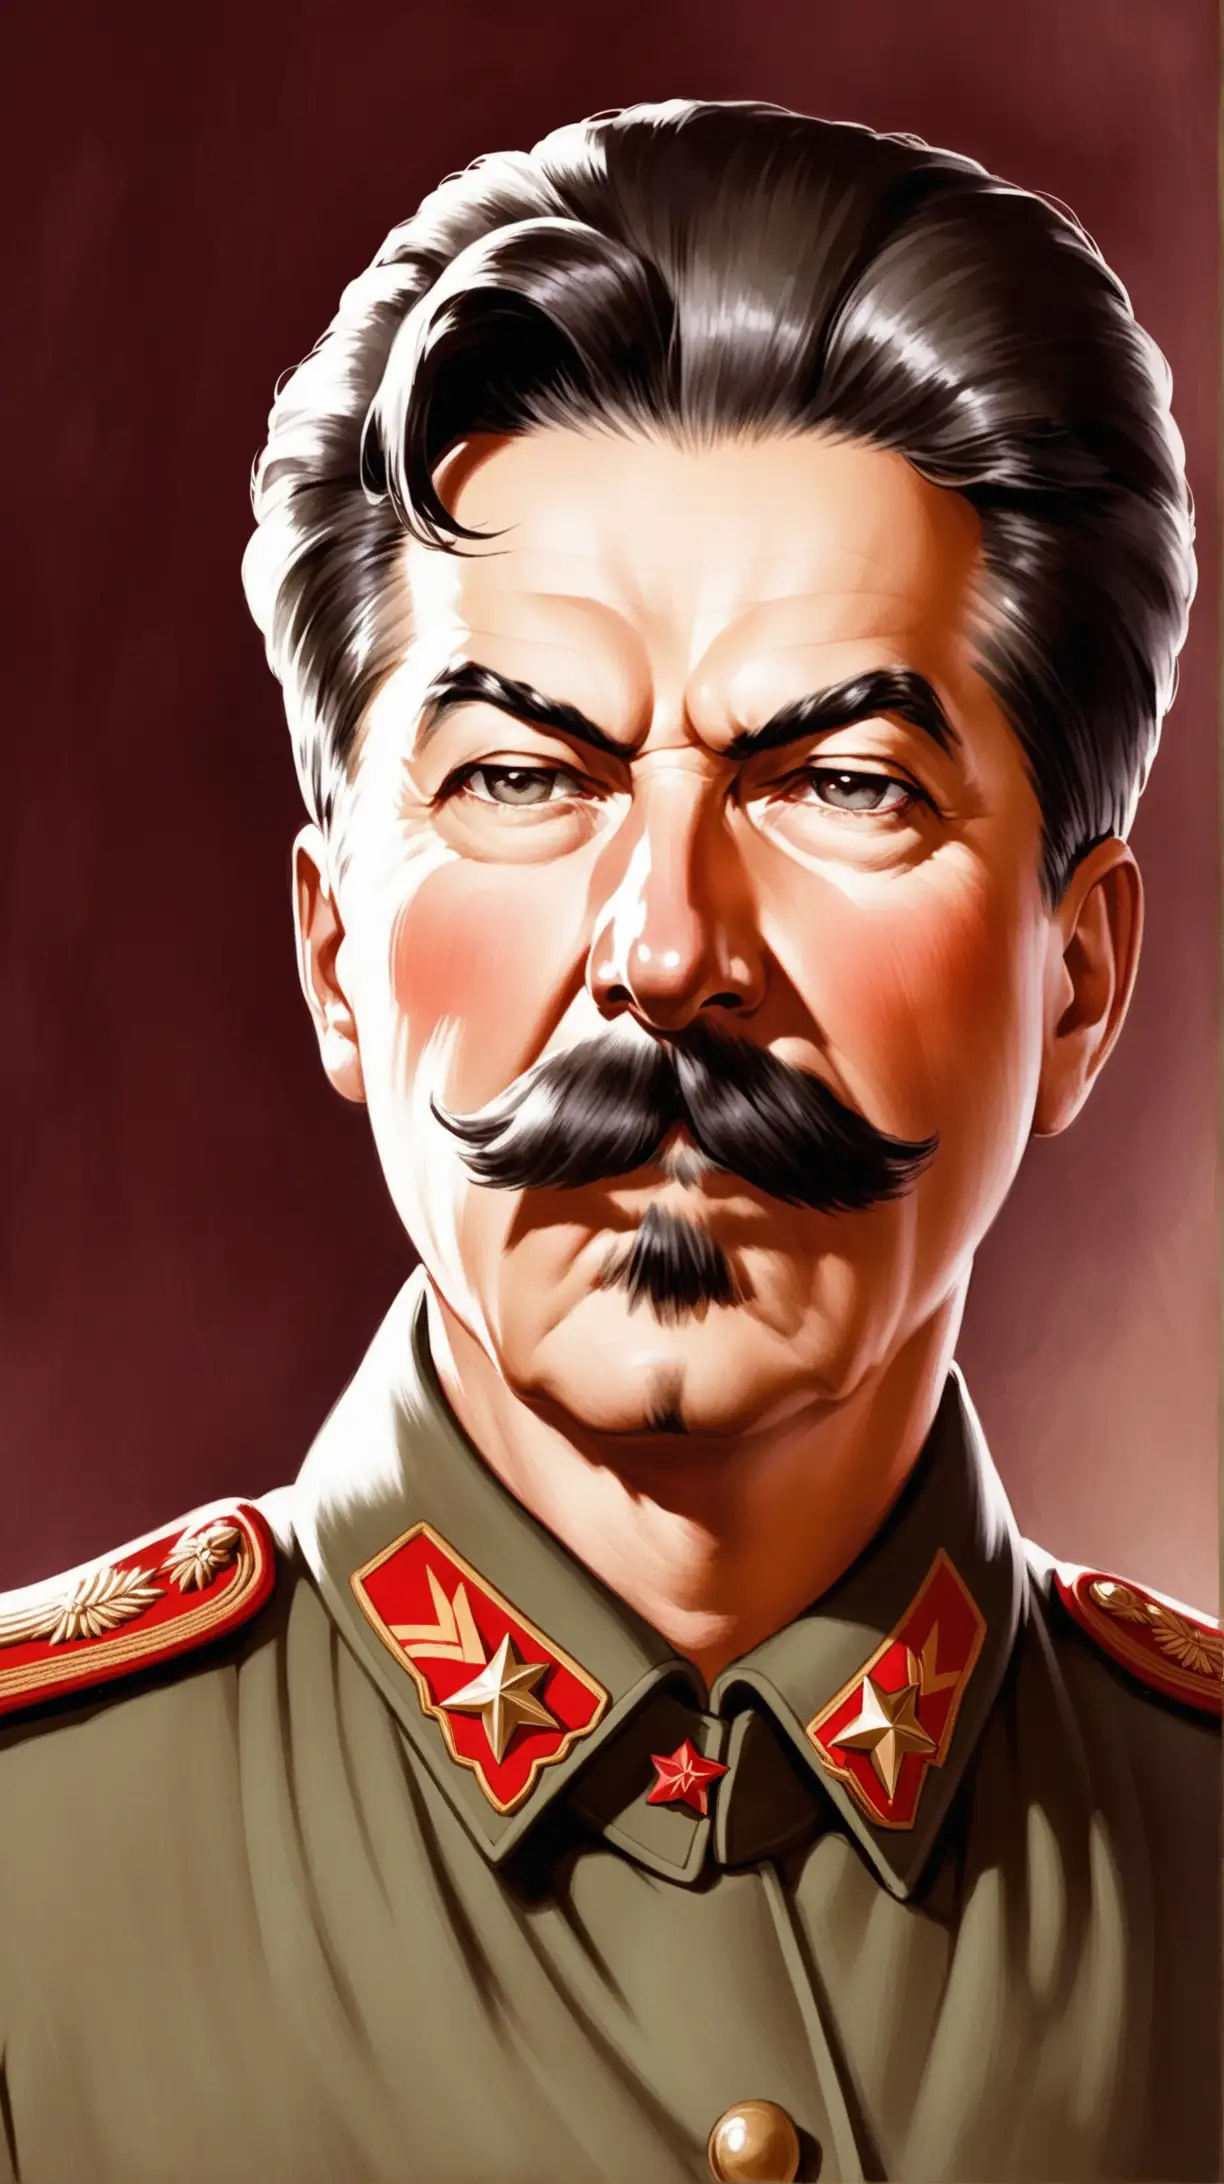  Surprising Facts About Joseph Stalin

Scene dramatic and cinematic with bad storm